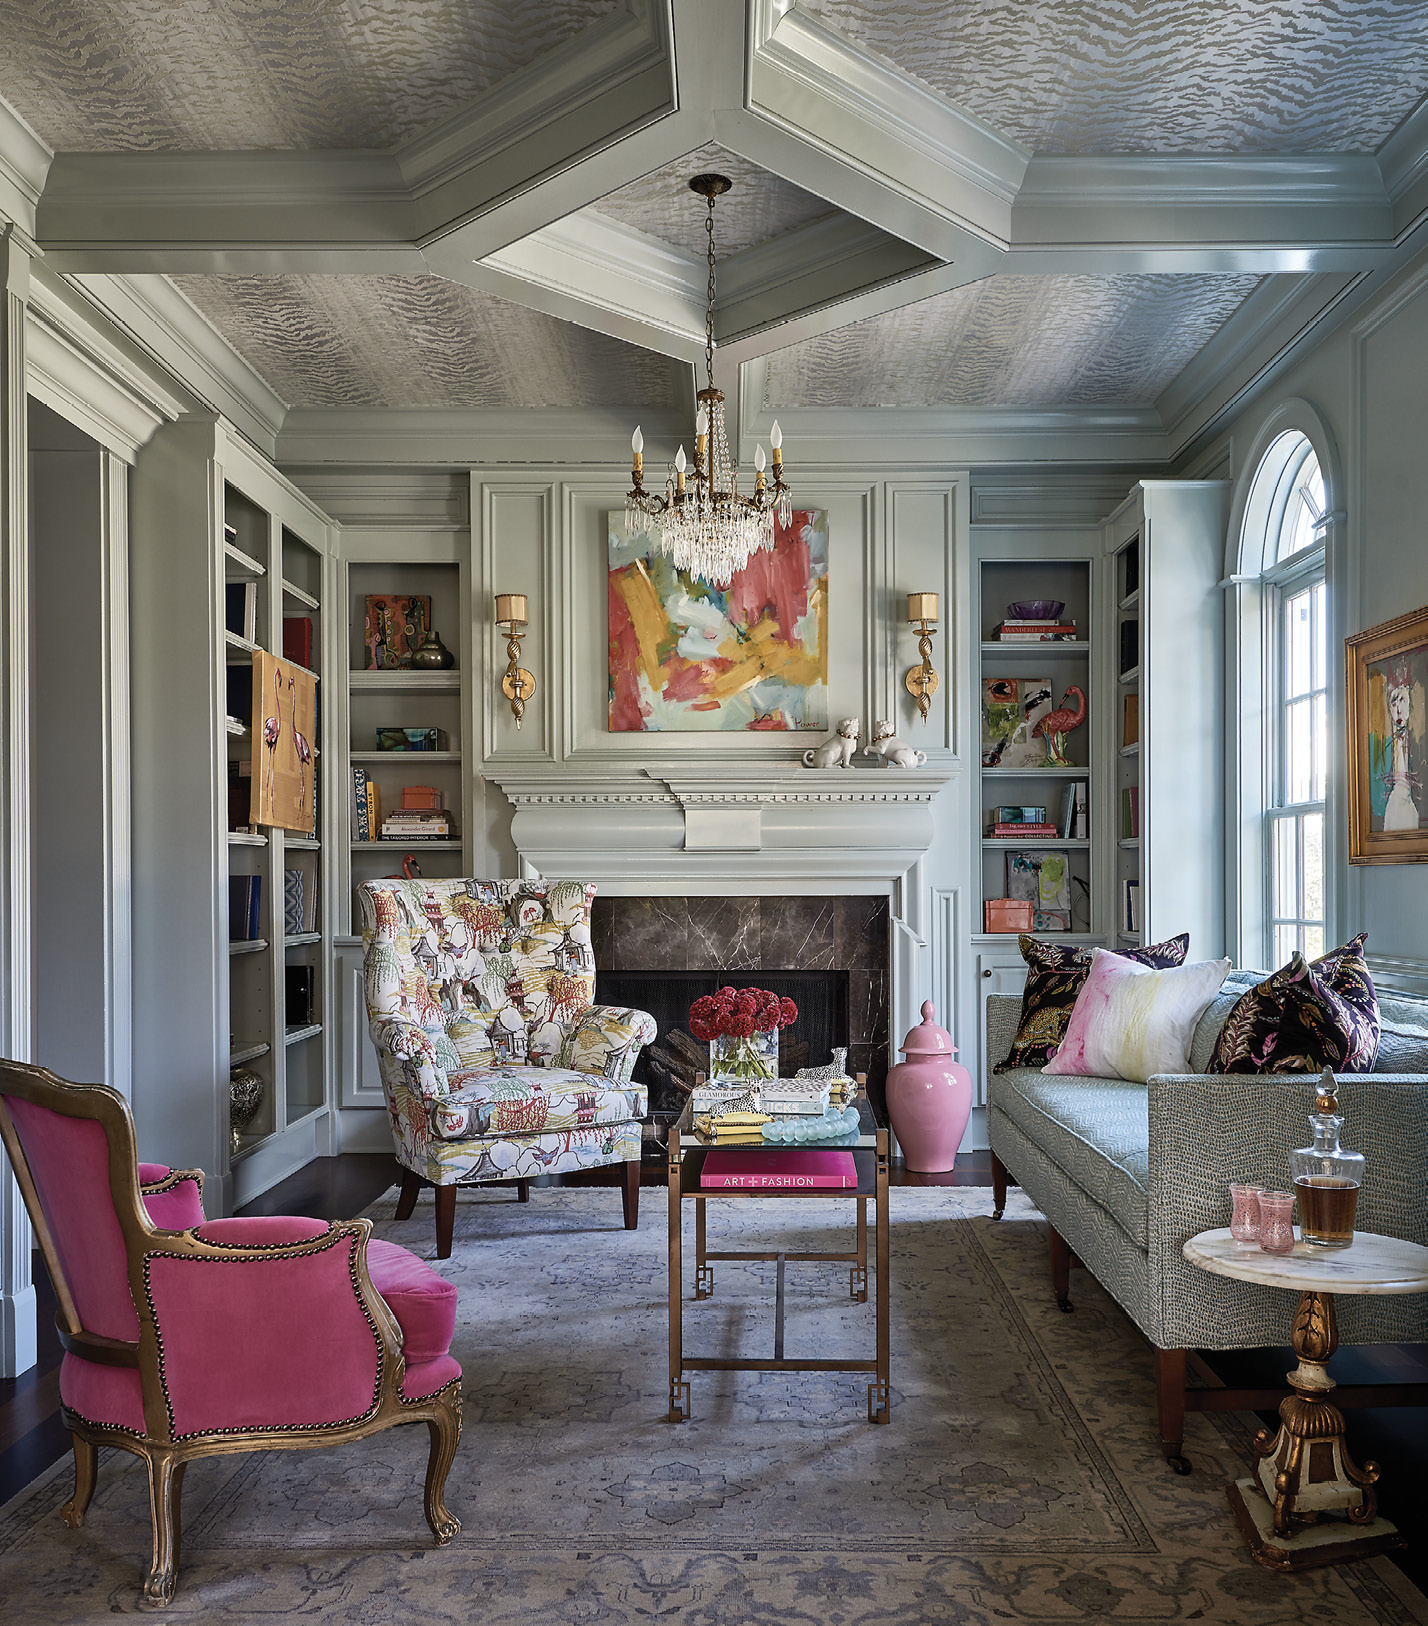 In the library, which was previously paneled in walnut, a pale mint paint (Farrow &amp; Ball “Cromarty No. 285”), Thibaut “Tiger Flock” wallpaper, pops of pink, and a crystal chandelier achieved the glamorous, New Orleans-inspired aesthetic the homeowner desired.